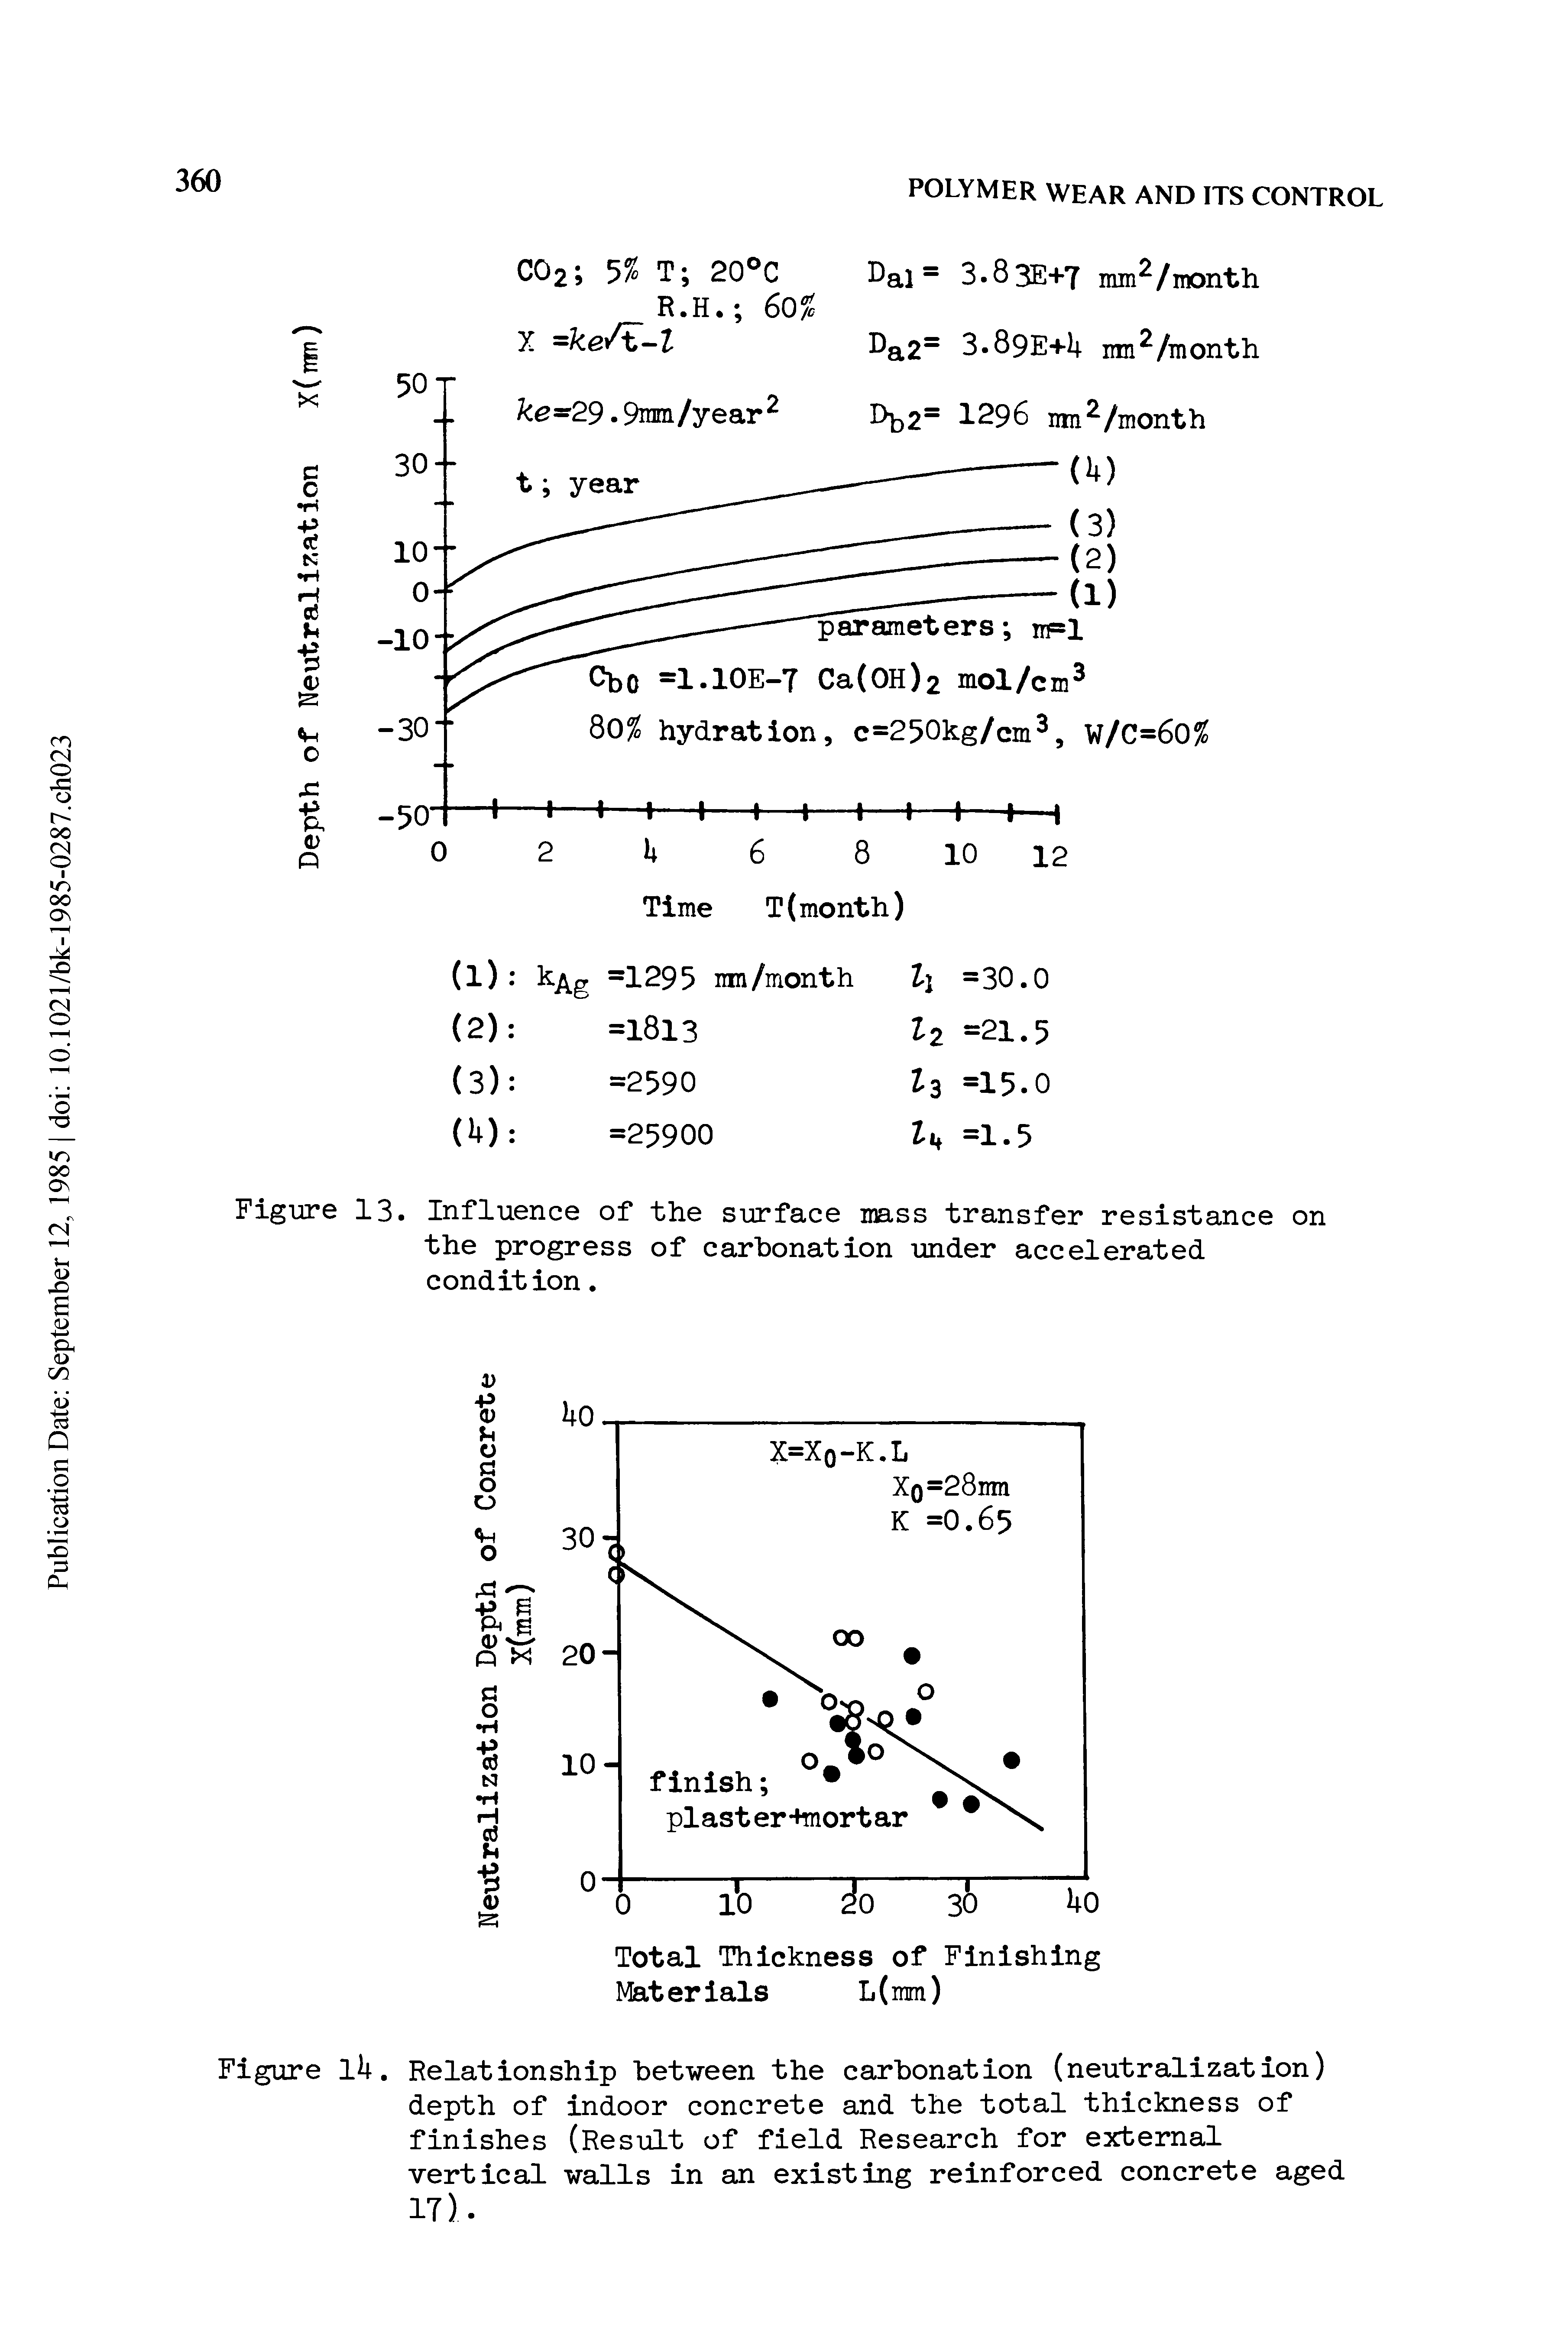 Figure 13. Influence of the surface mass transfer resistance on the progress of carhonation under accelerated condition.